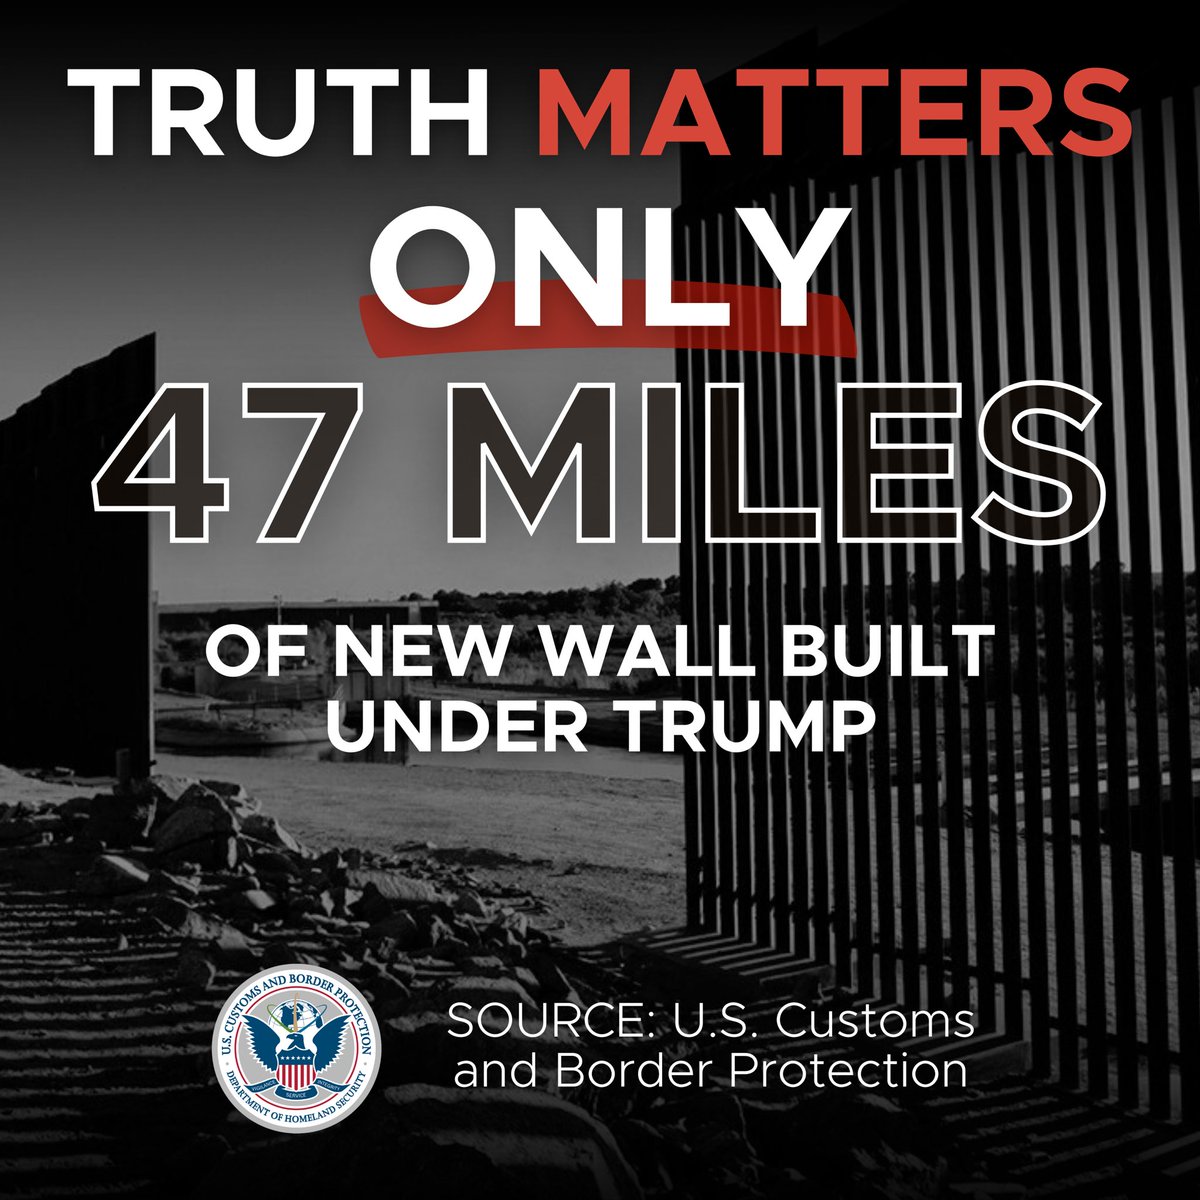 Donald, I know it hurts to hear the truth. But you only built 47 miles of new wall, & Mexico didn’t pay for any of it. Not one damn peso. At this rate, it would take you nearly 110 years to completely finish the wall. You fail, you lie. Rinse & repeat.